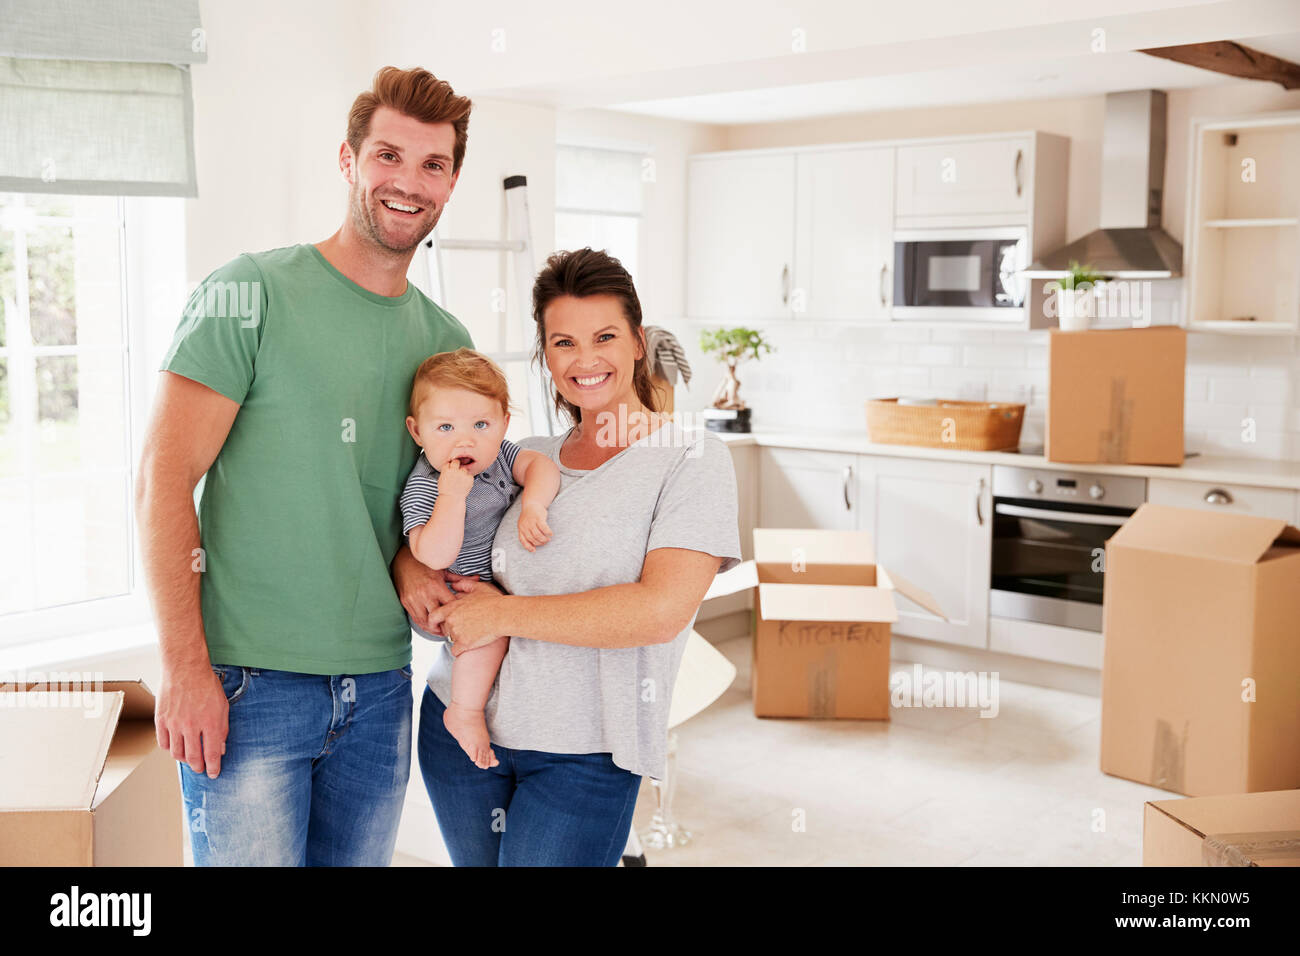 Portrait Of Family With Baby On Moving In Day Stock Photo